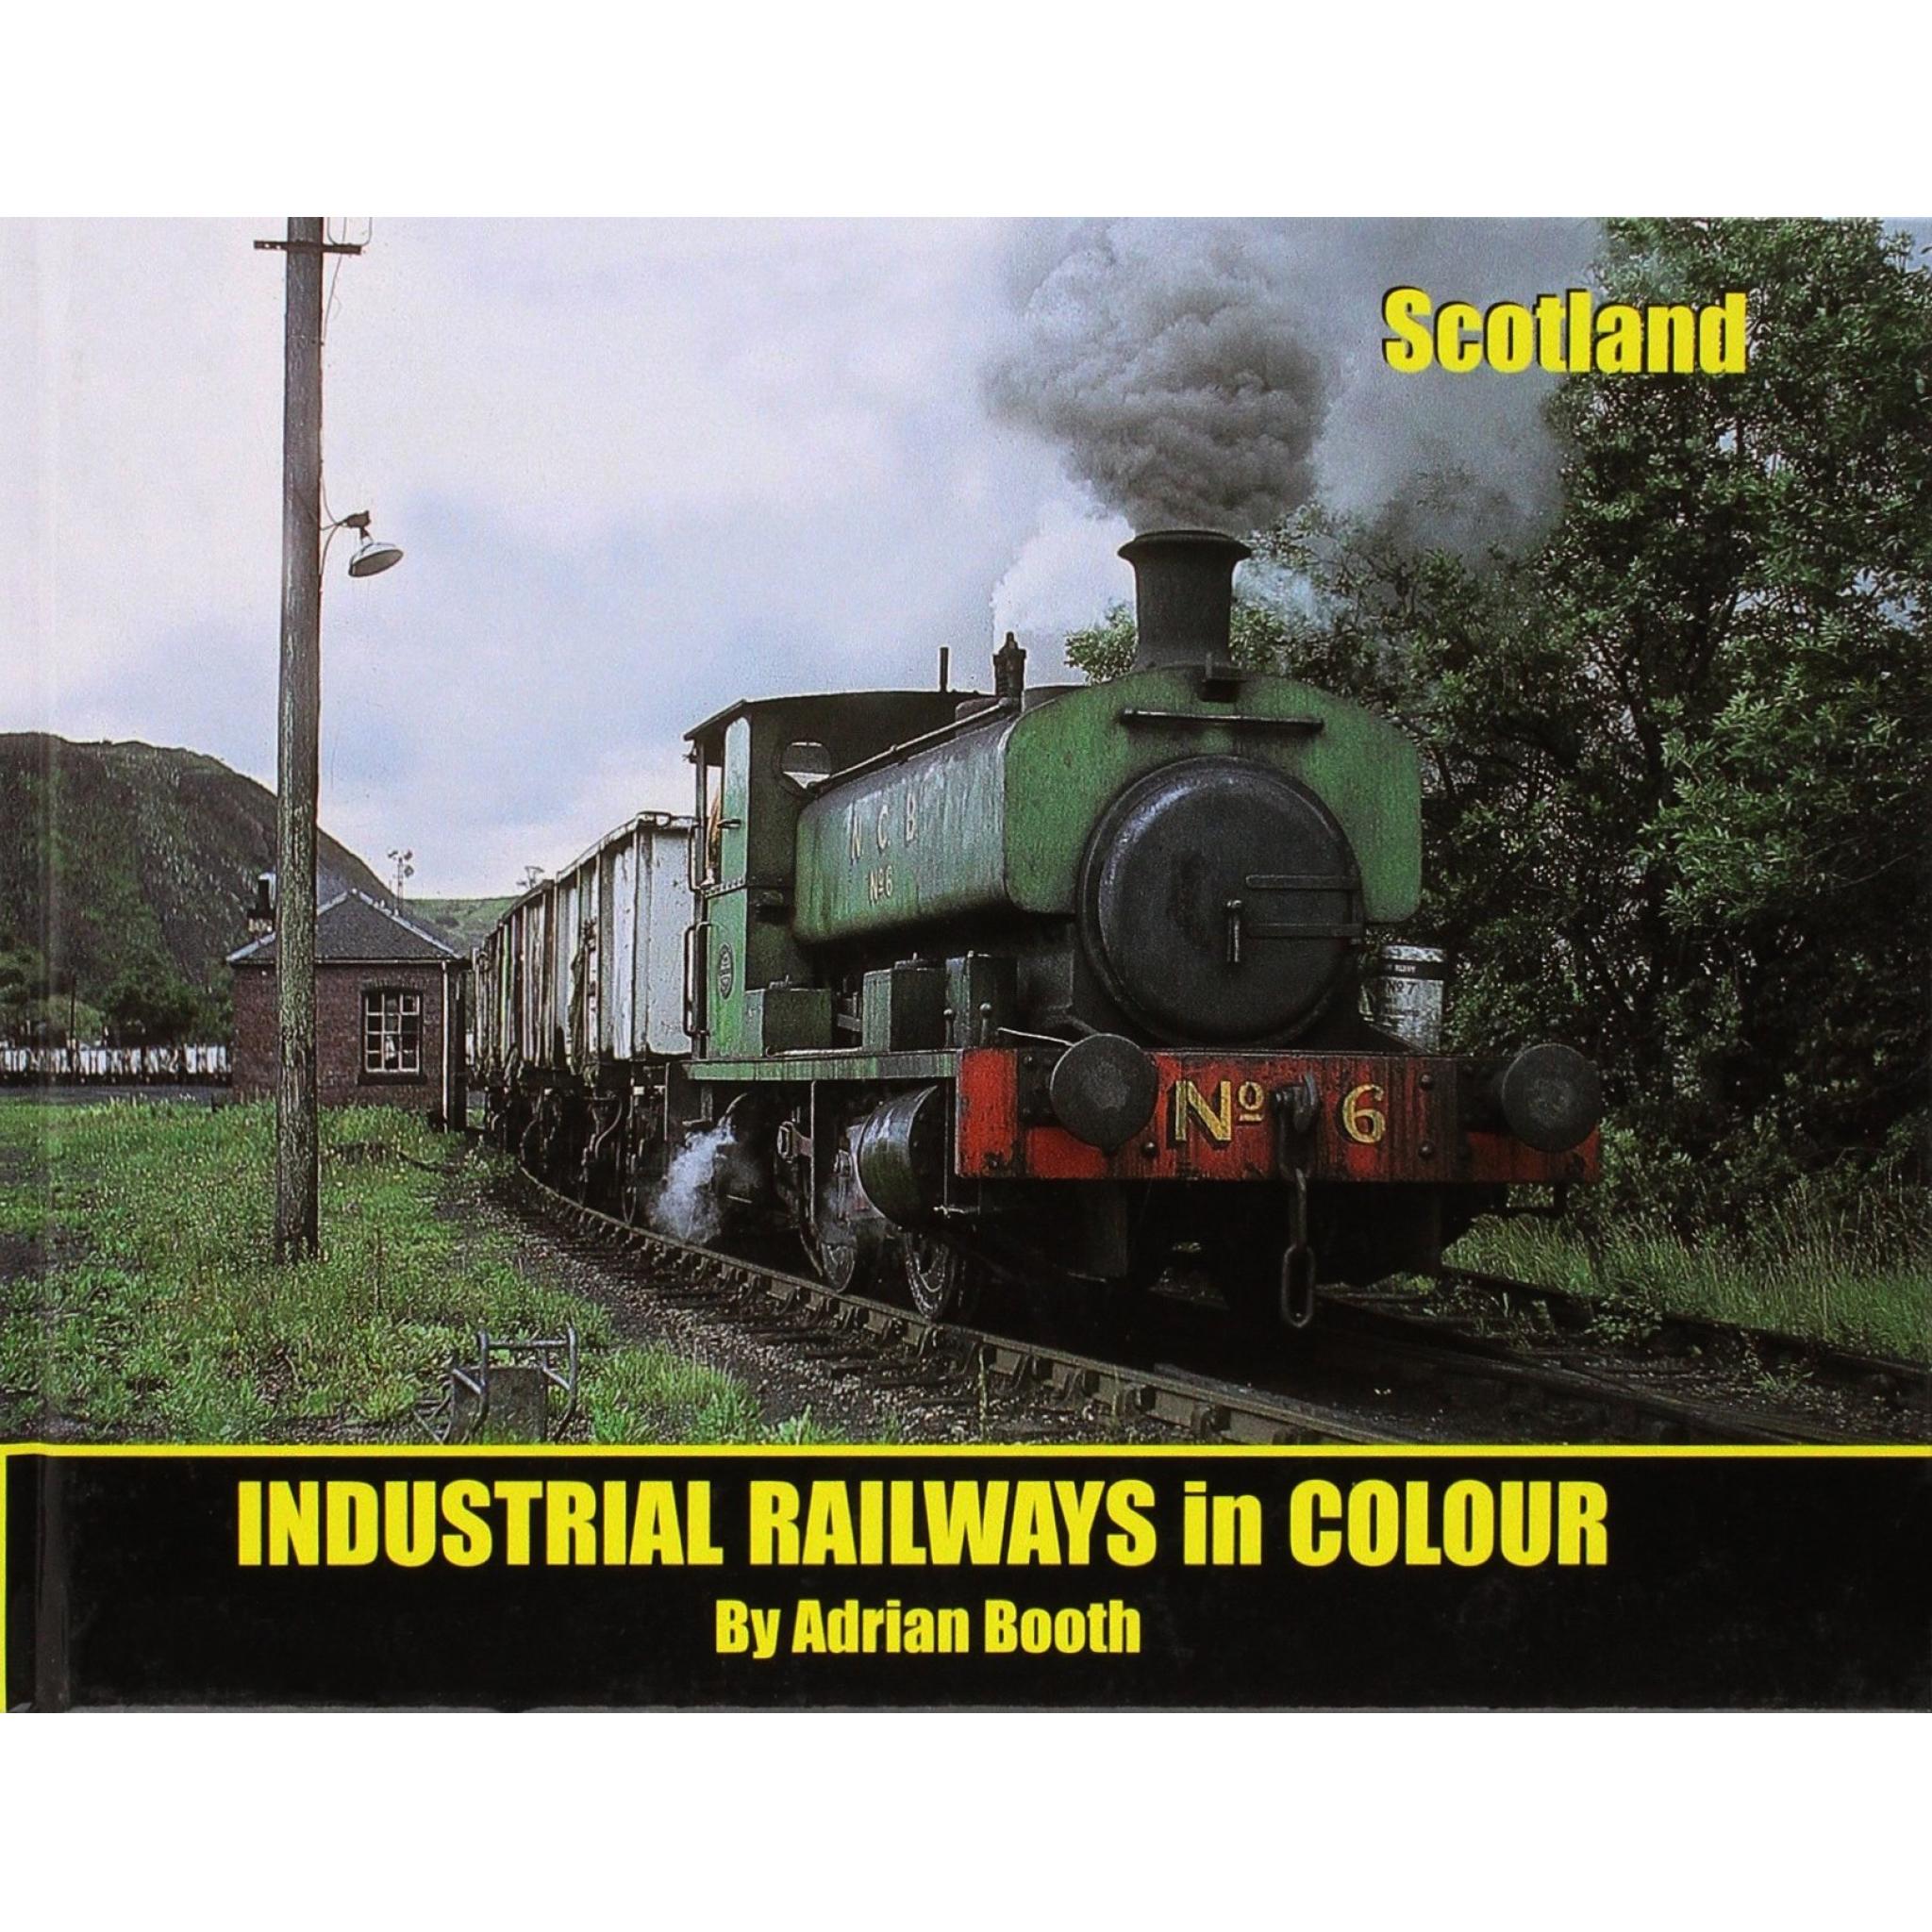 50% OFF RRP is £11.95  INDUSTRIAL RAILWAYS IN COLOUR - SCOTLAND